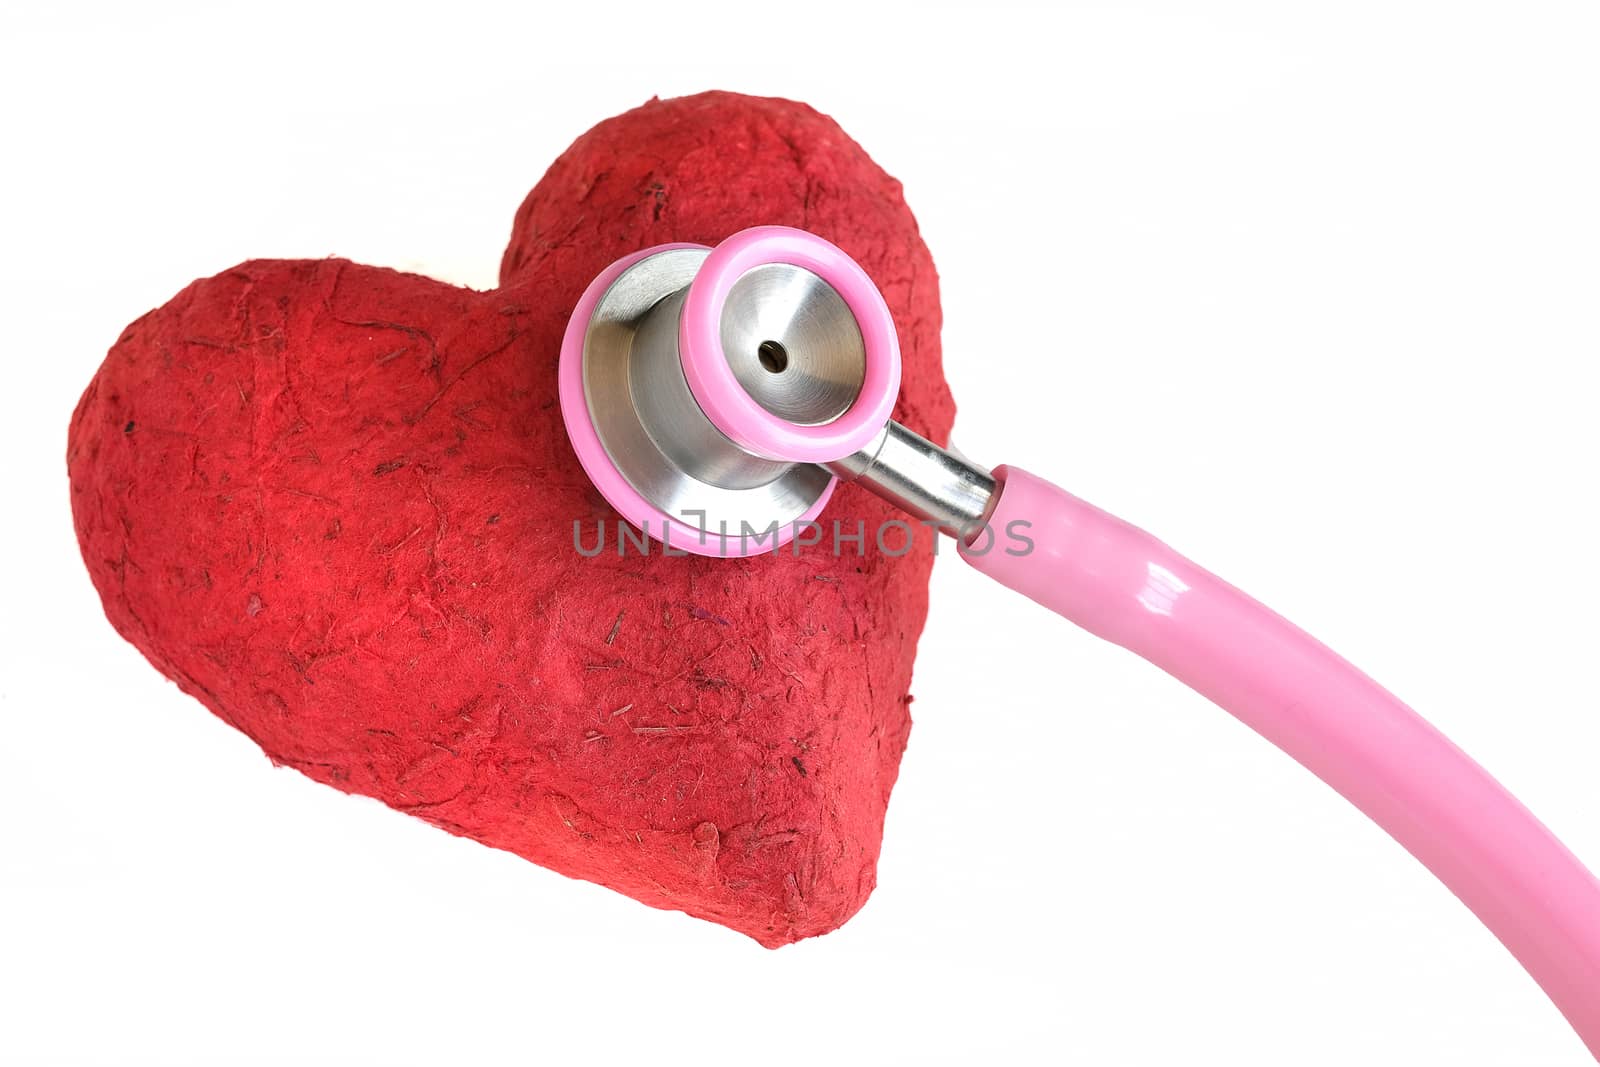 A stethoscope and a handmade red paper mache heart. Closeup, isolated on white background. Medicine and health concept.